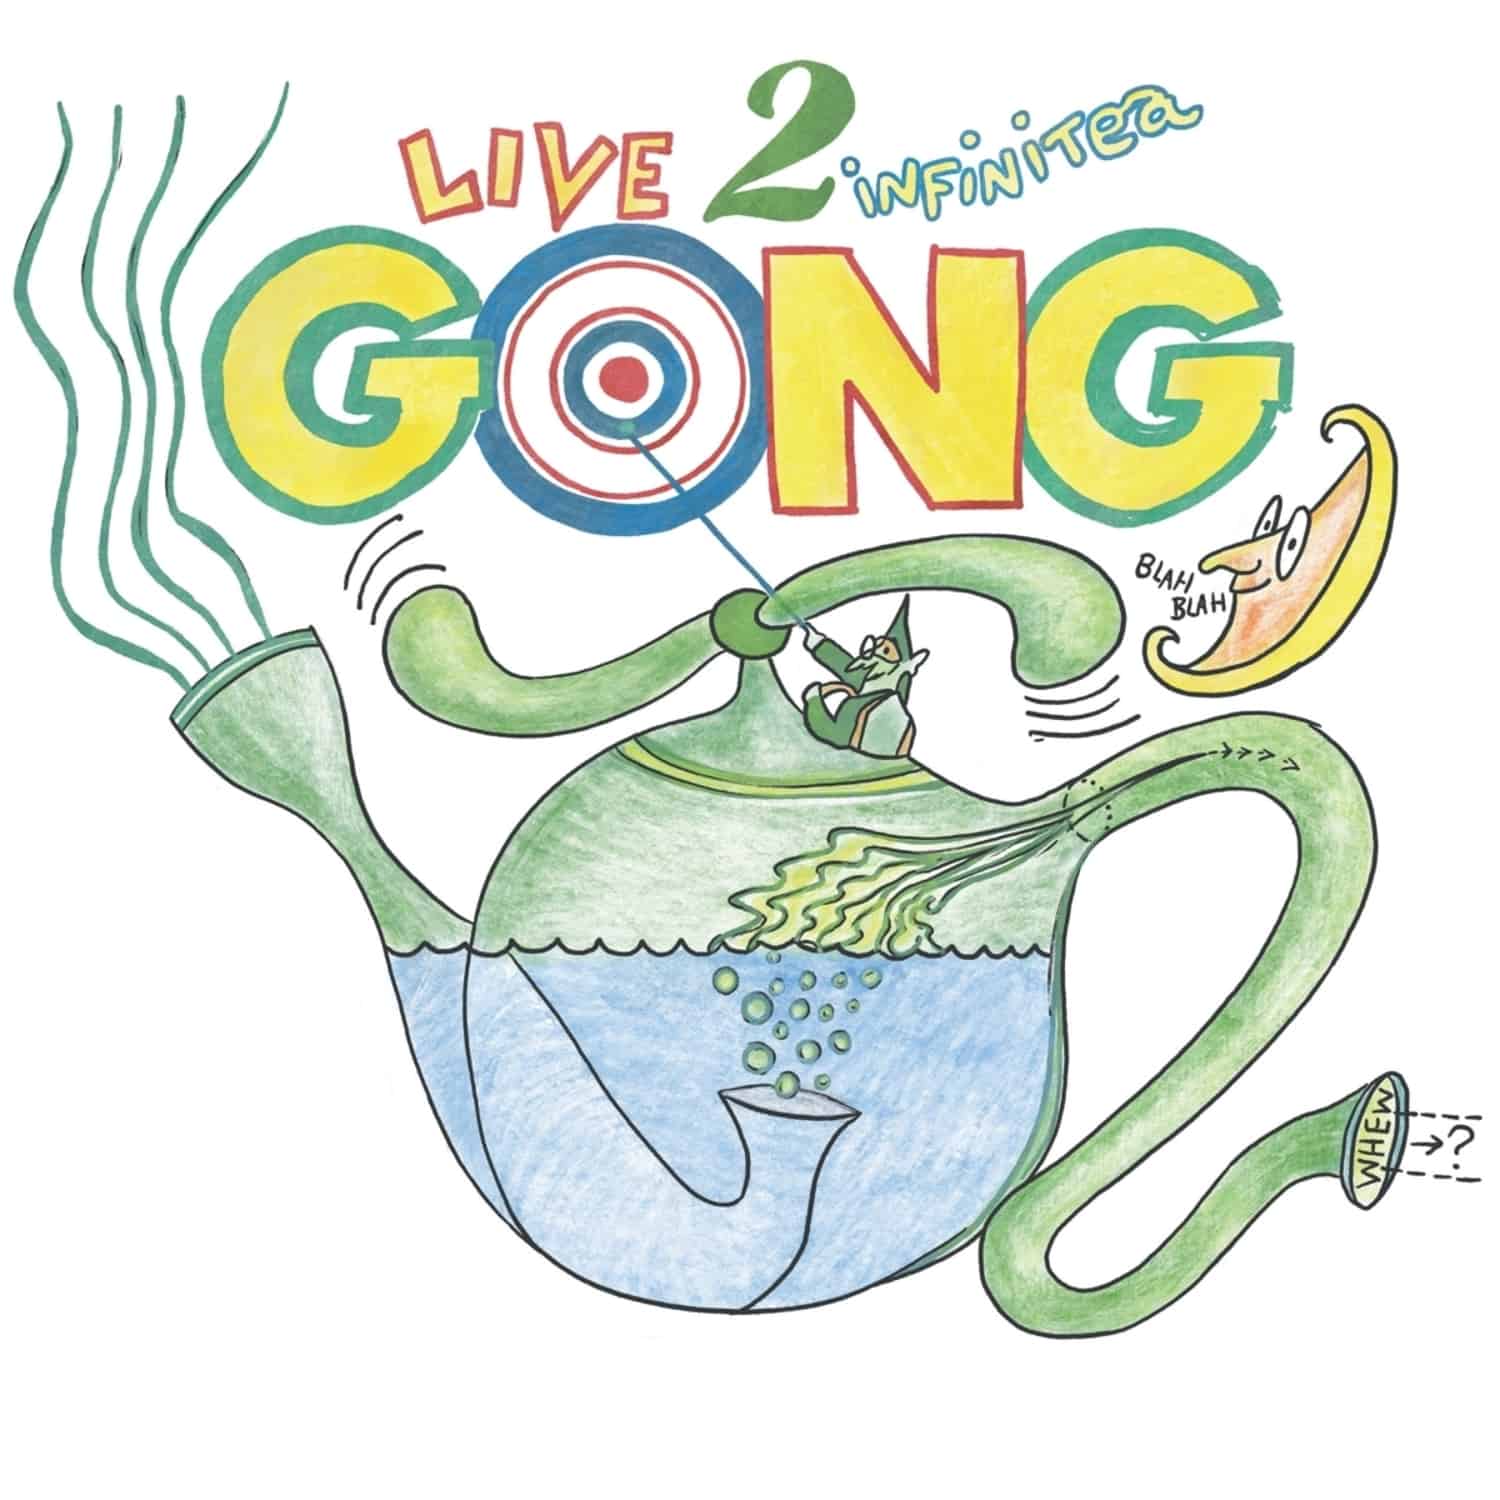 Gong - LIVE 2 INFINITEA-ON TOUR SPRING 2000 